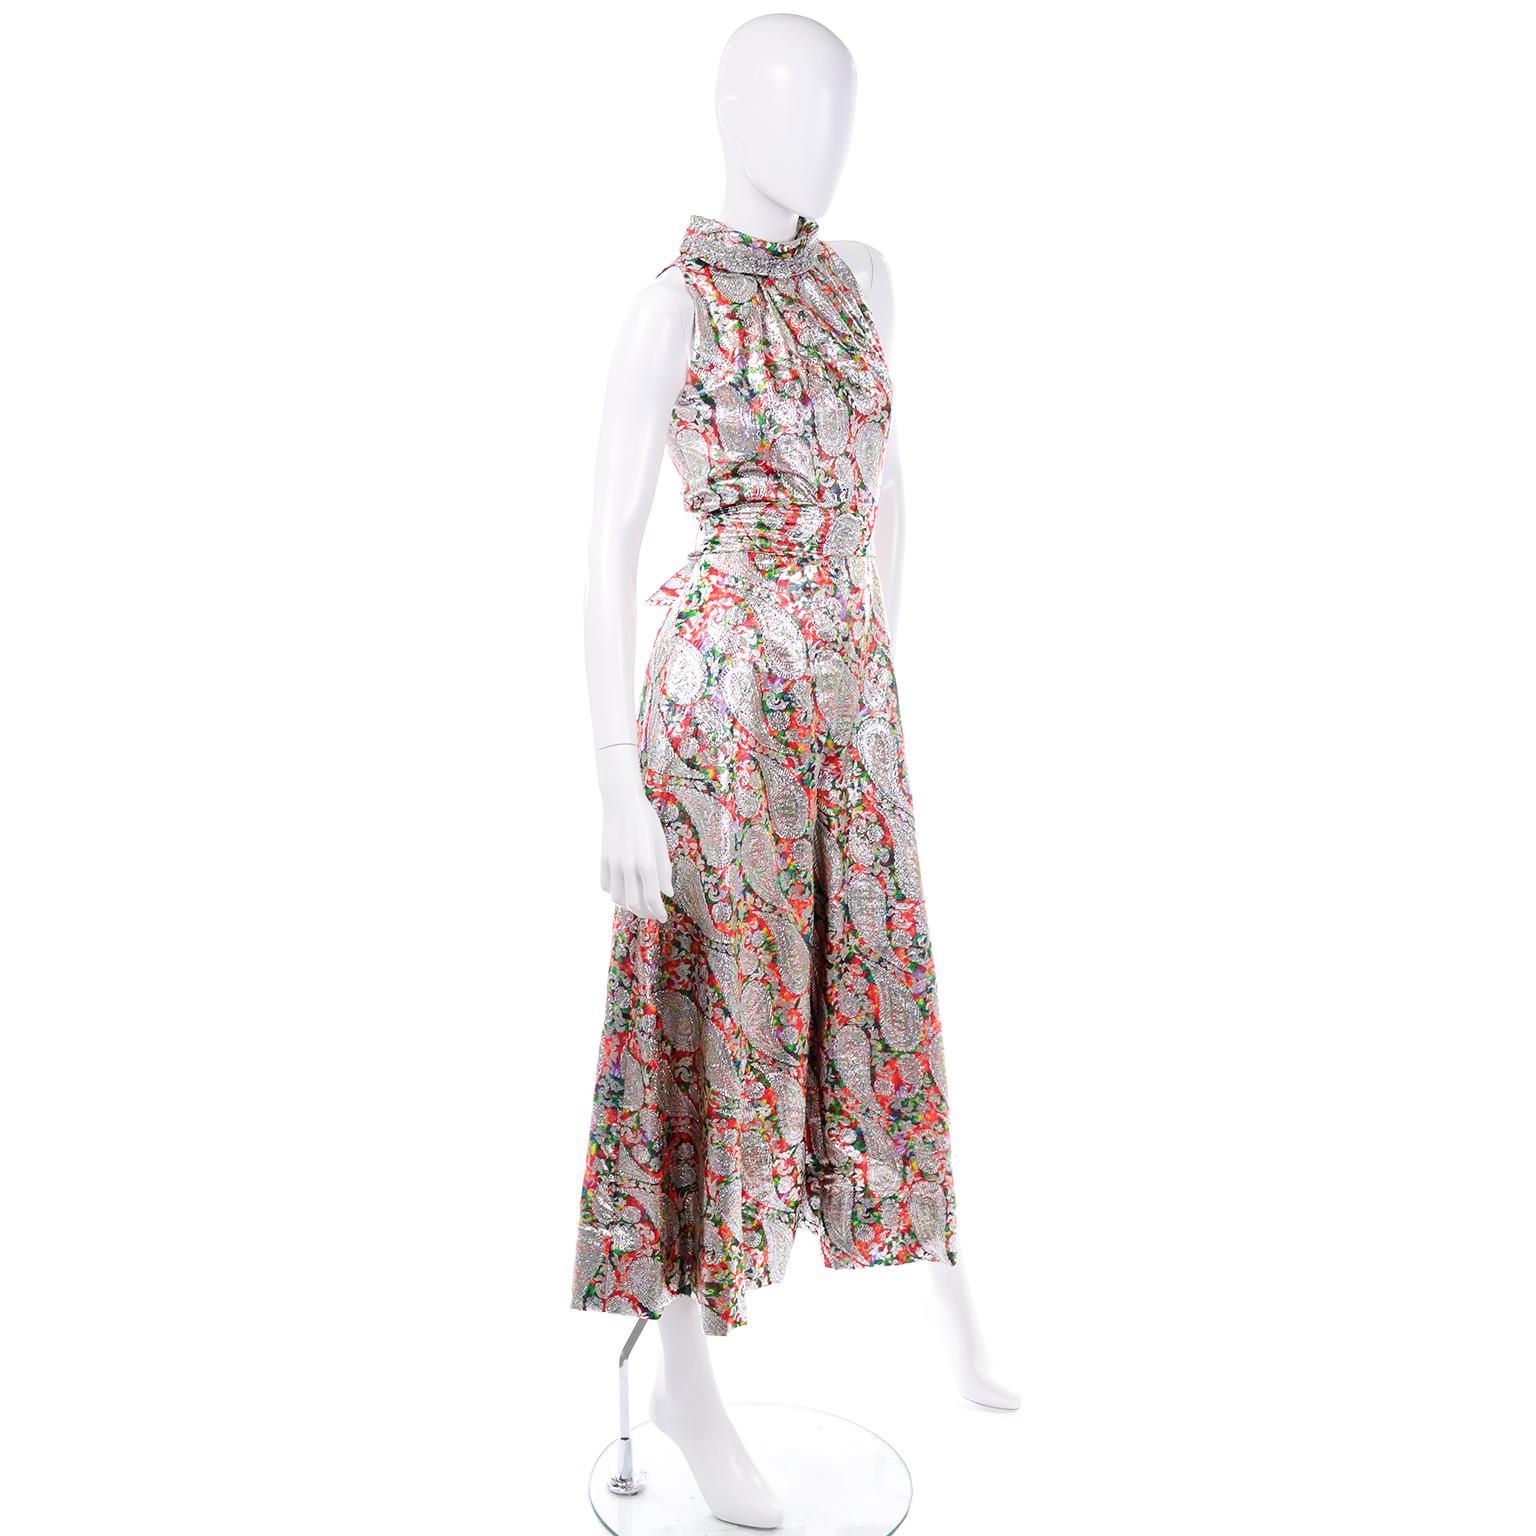 This is a fabulous and festive jumpsuit for the holidays as it would make a great evening dress alternative!! We love the rainbow and silver tone lamé paisley detailing throughout this silhouette. The colors of this jumpsuit include: silver, red,